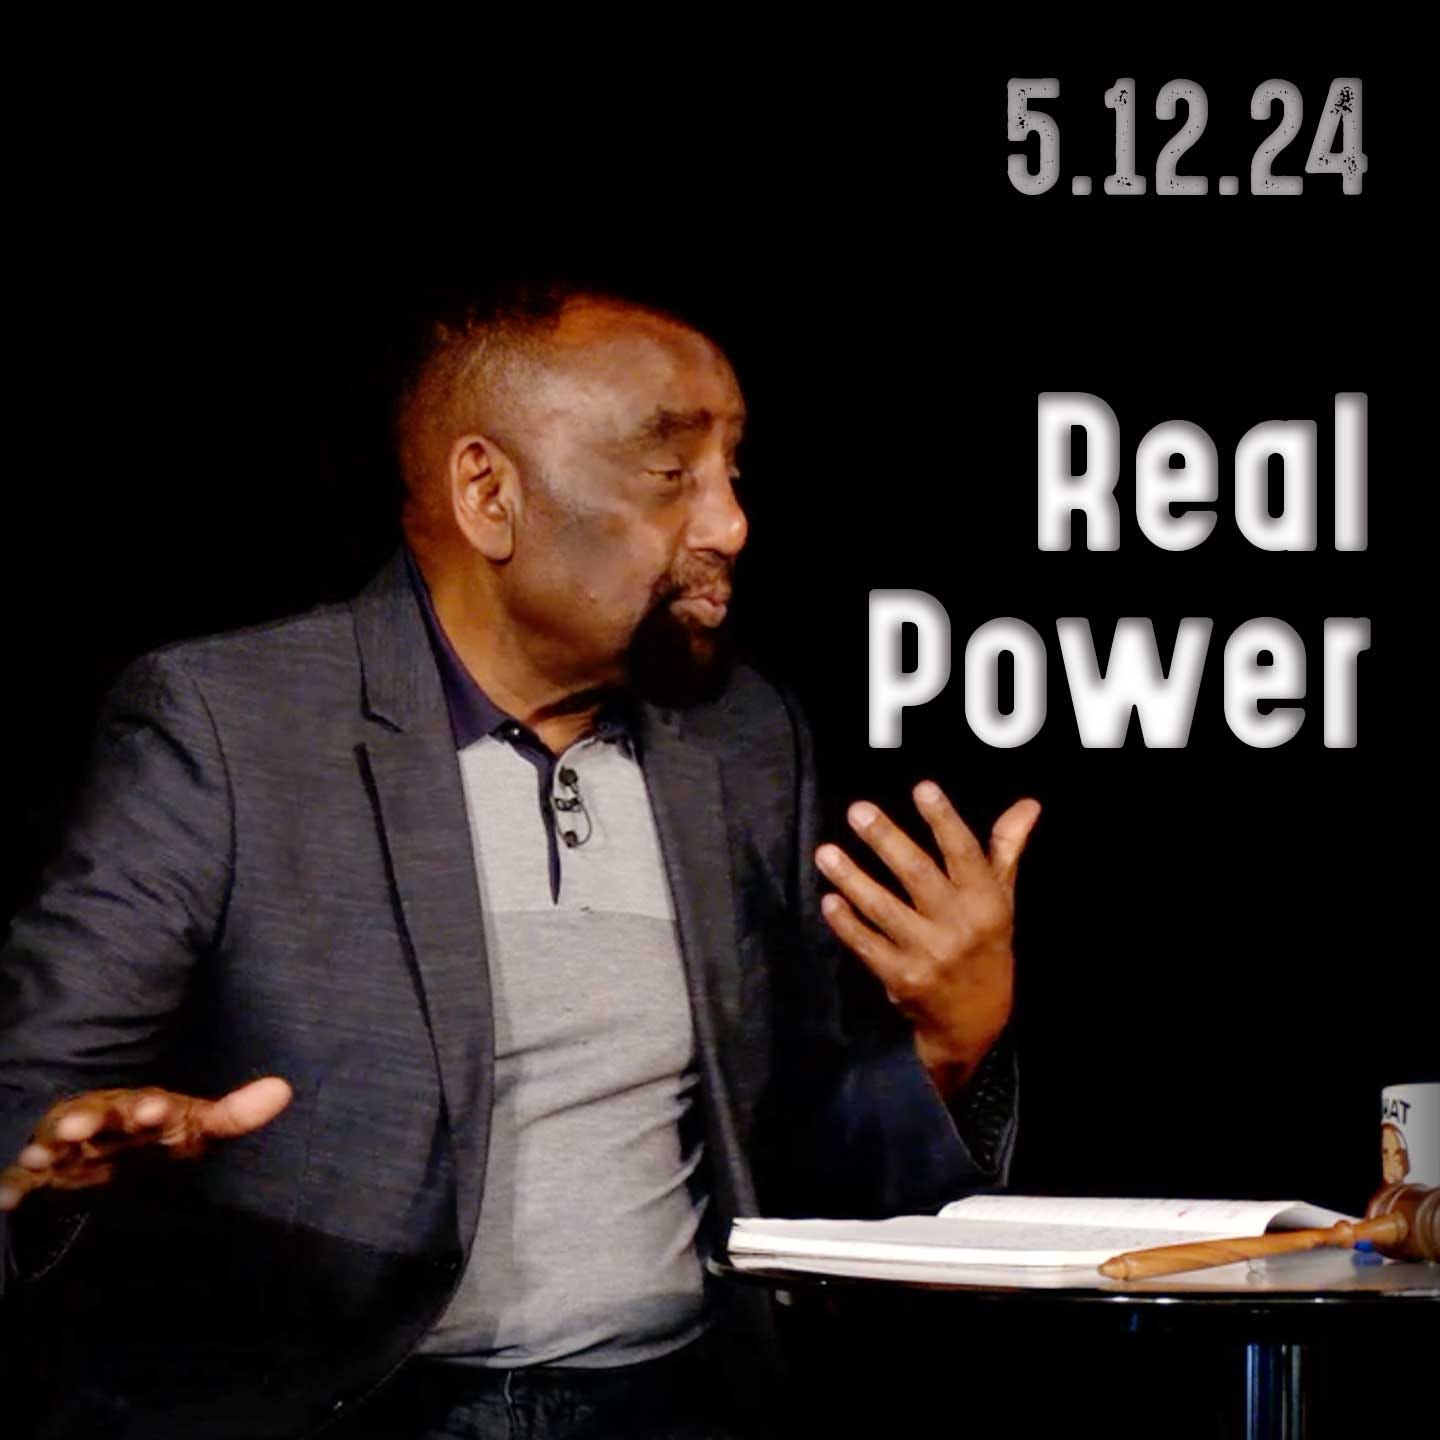 What is real power? | Church 5/12/24